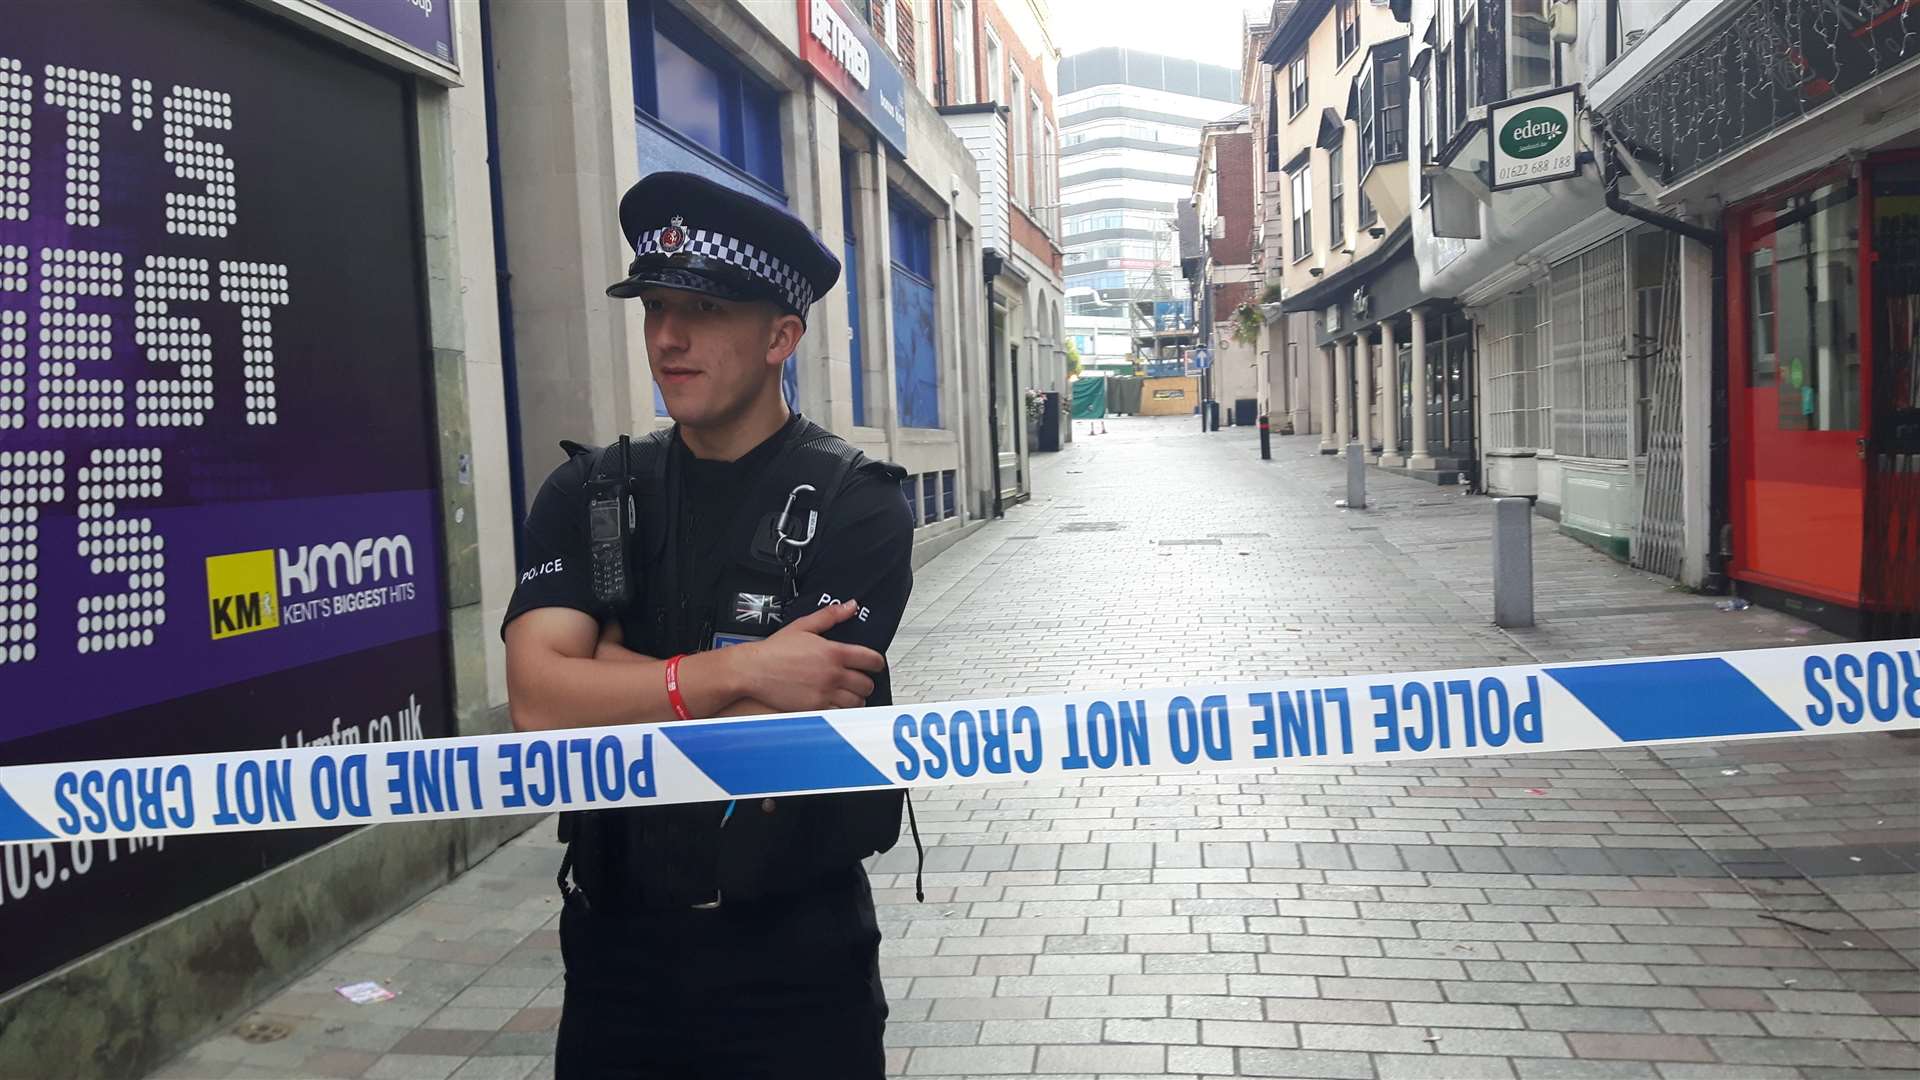 Police at the scene in Maidtsone town centre (15708424)